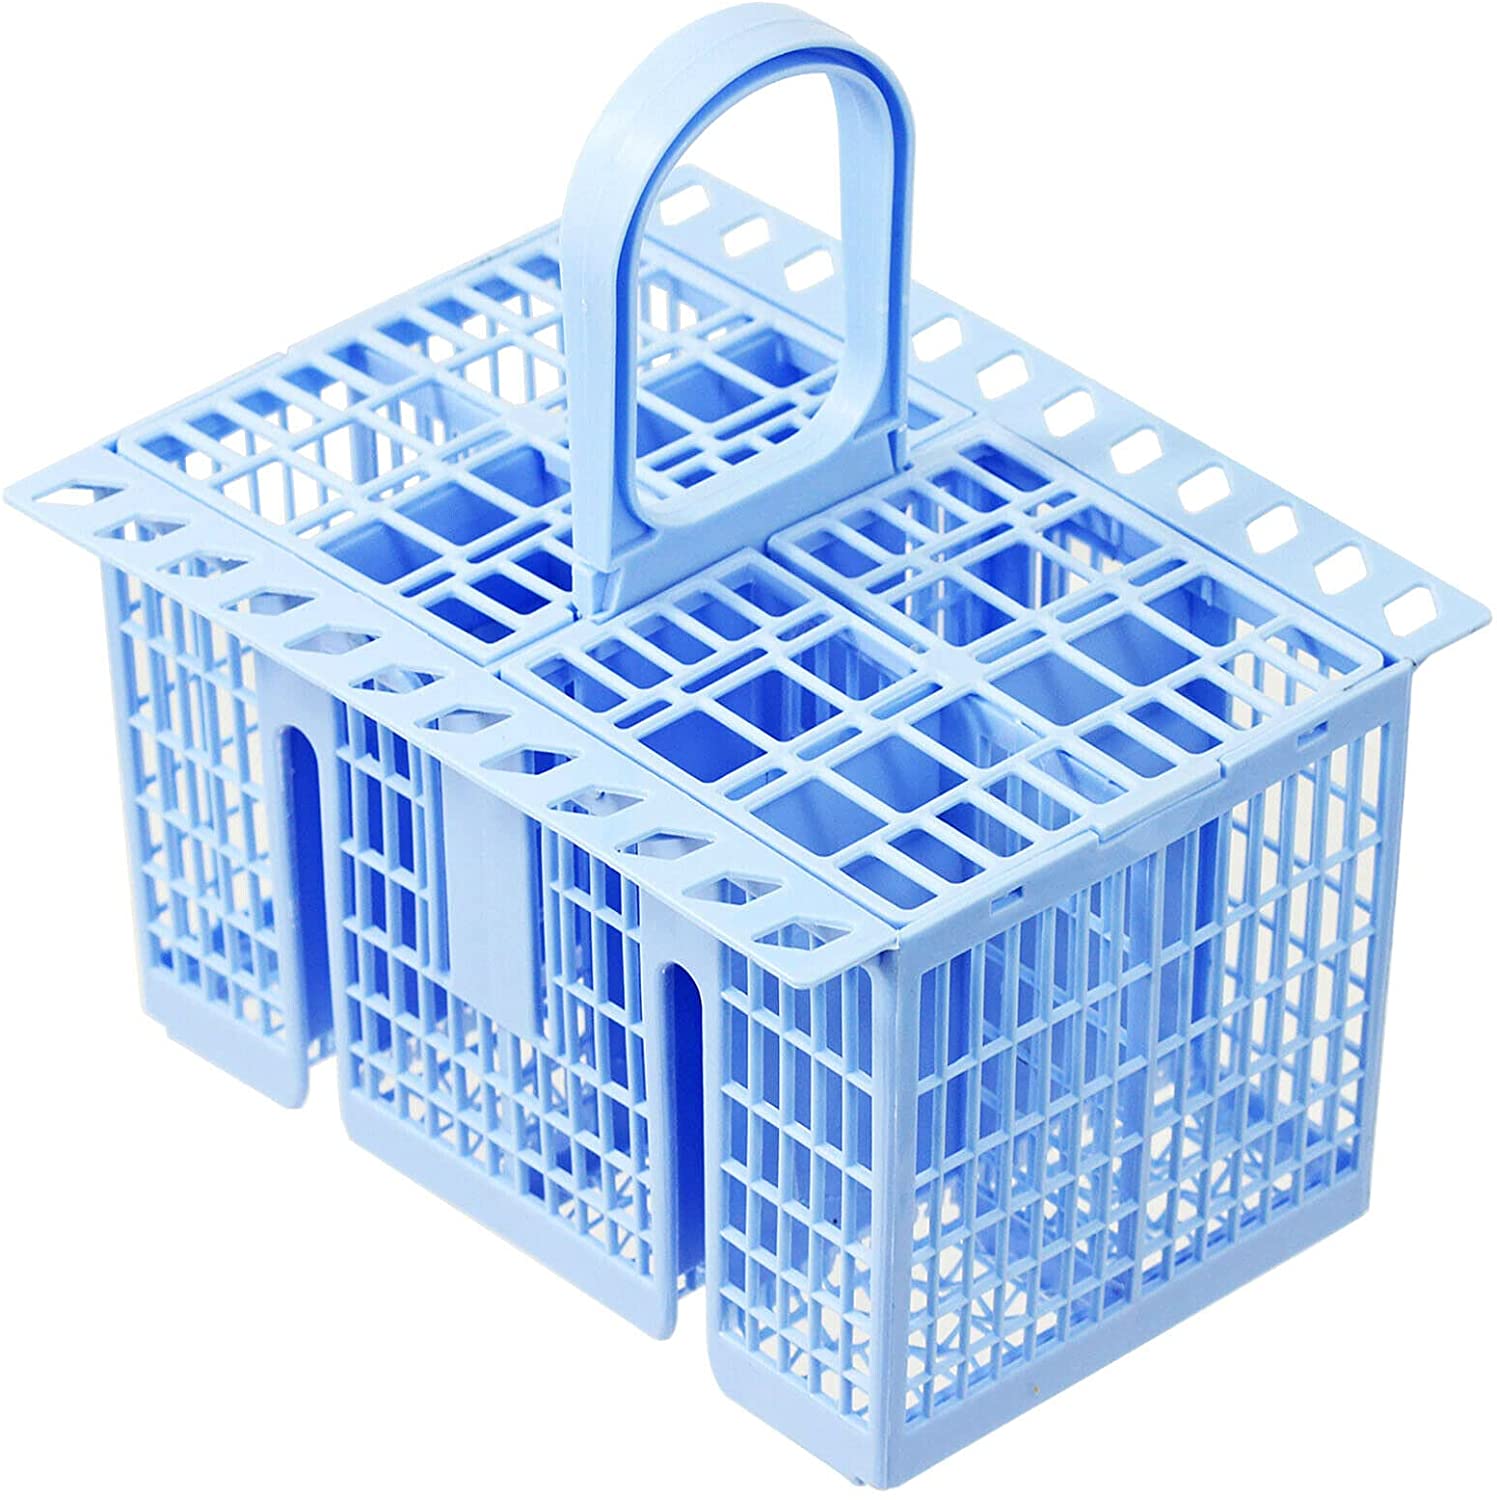 SPARES2GO Cutlery Basket compatible with AEG Dishwasher (Blue, 220 x 208 x 160mm)